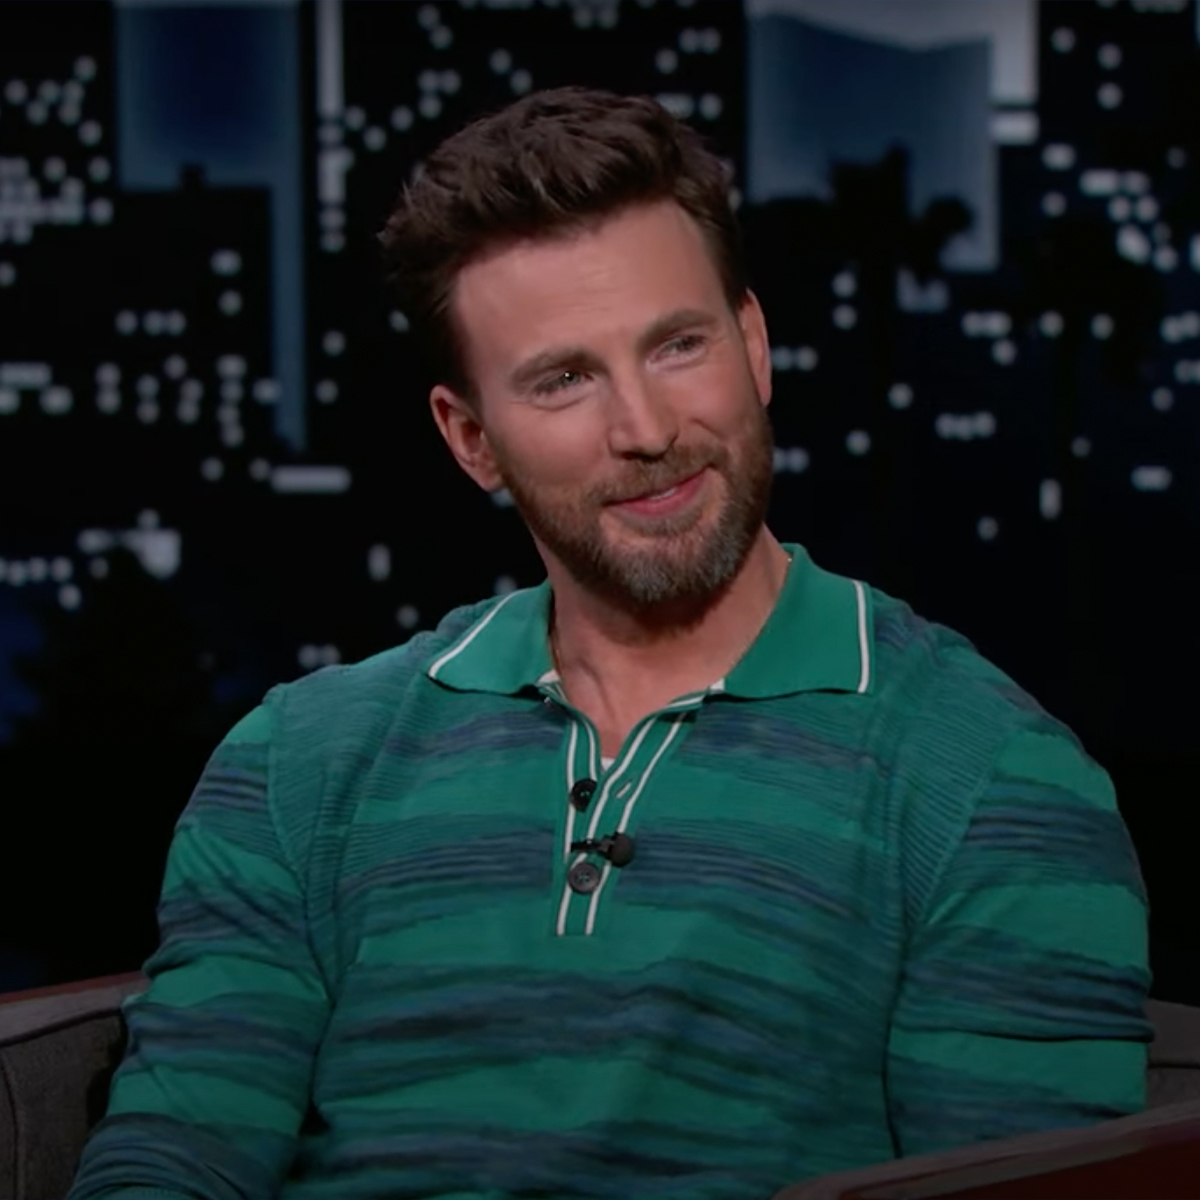 Chris Evans Recalls “Nerve-wracking” Experience Getting Mobbed By Fans